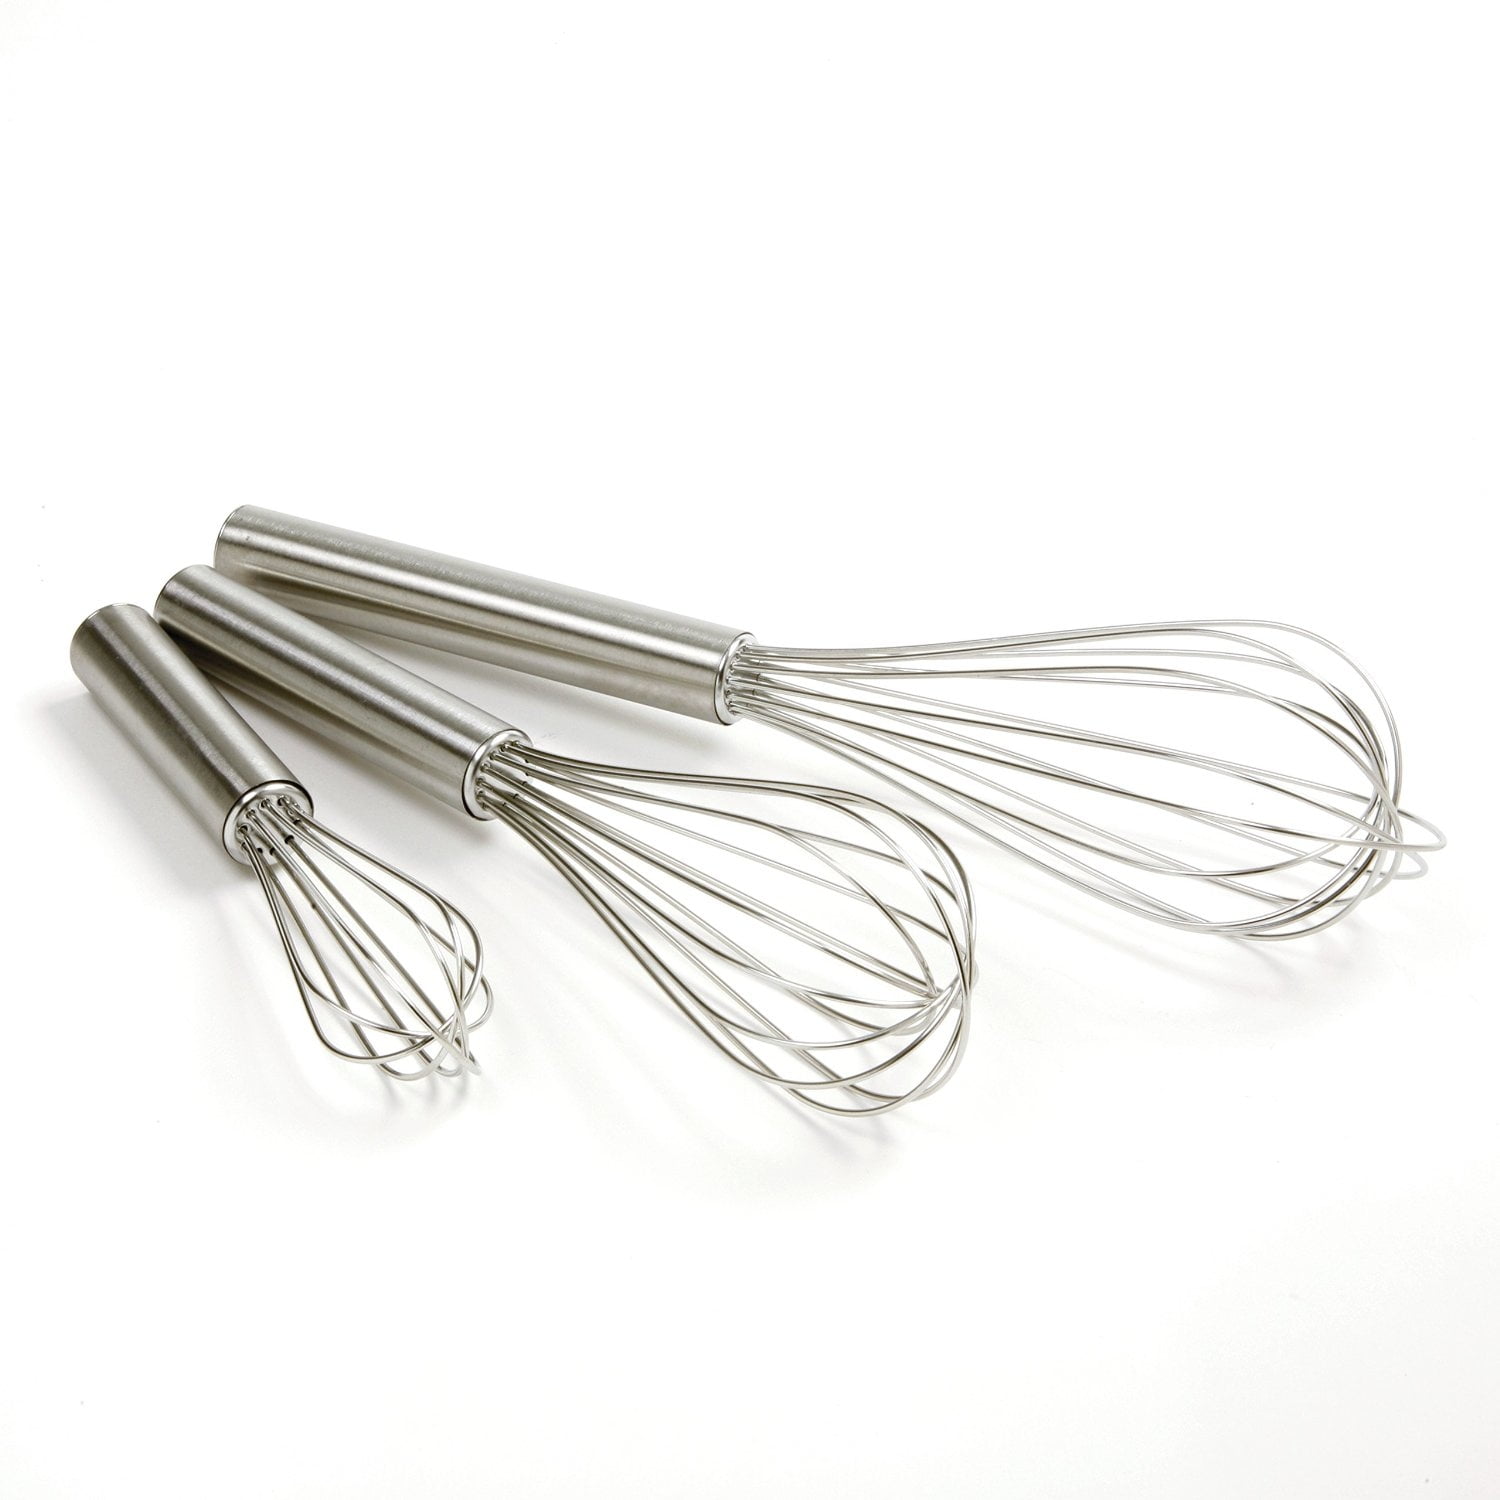 Pampered Chef Stainless Steal Whisk - Dutch Goat